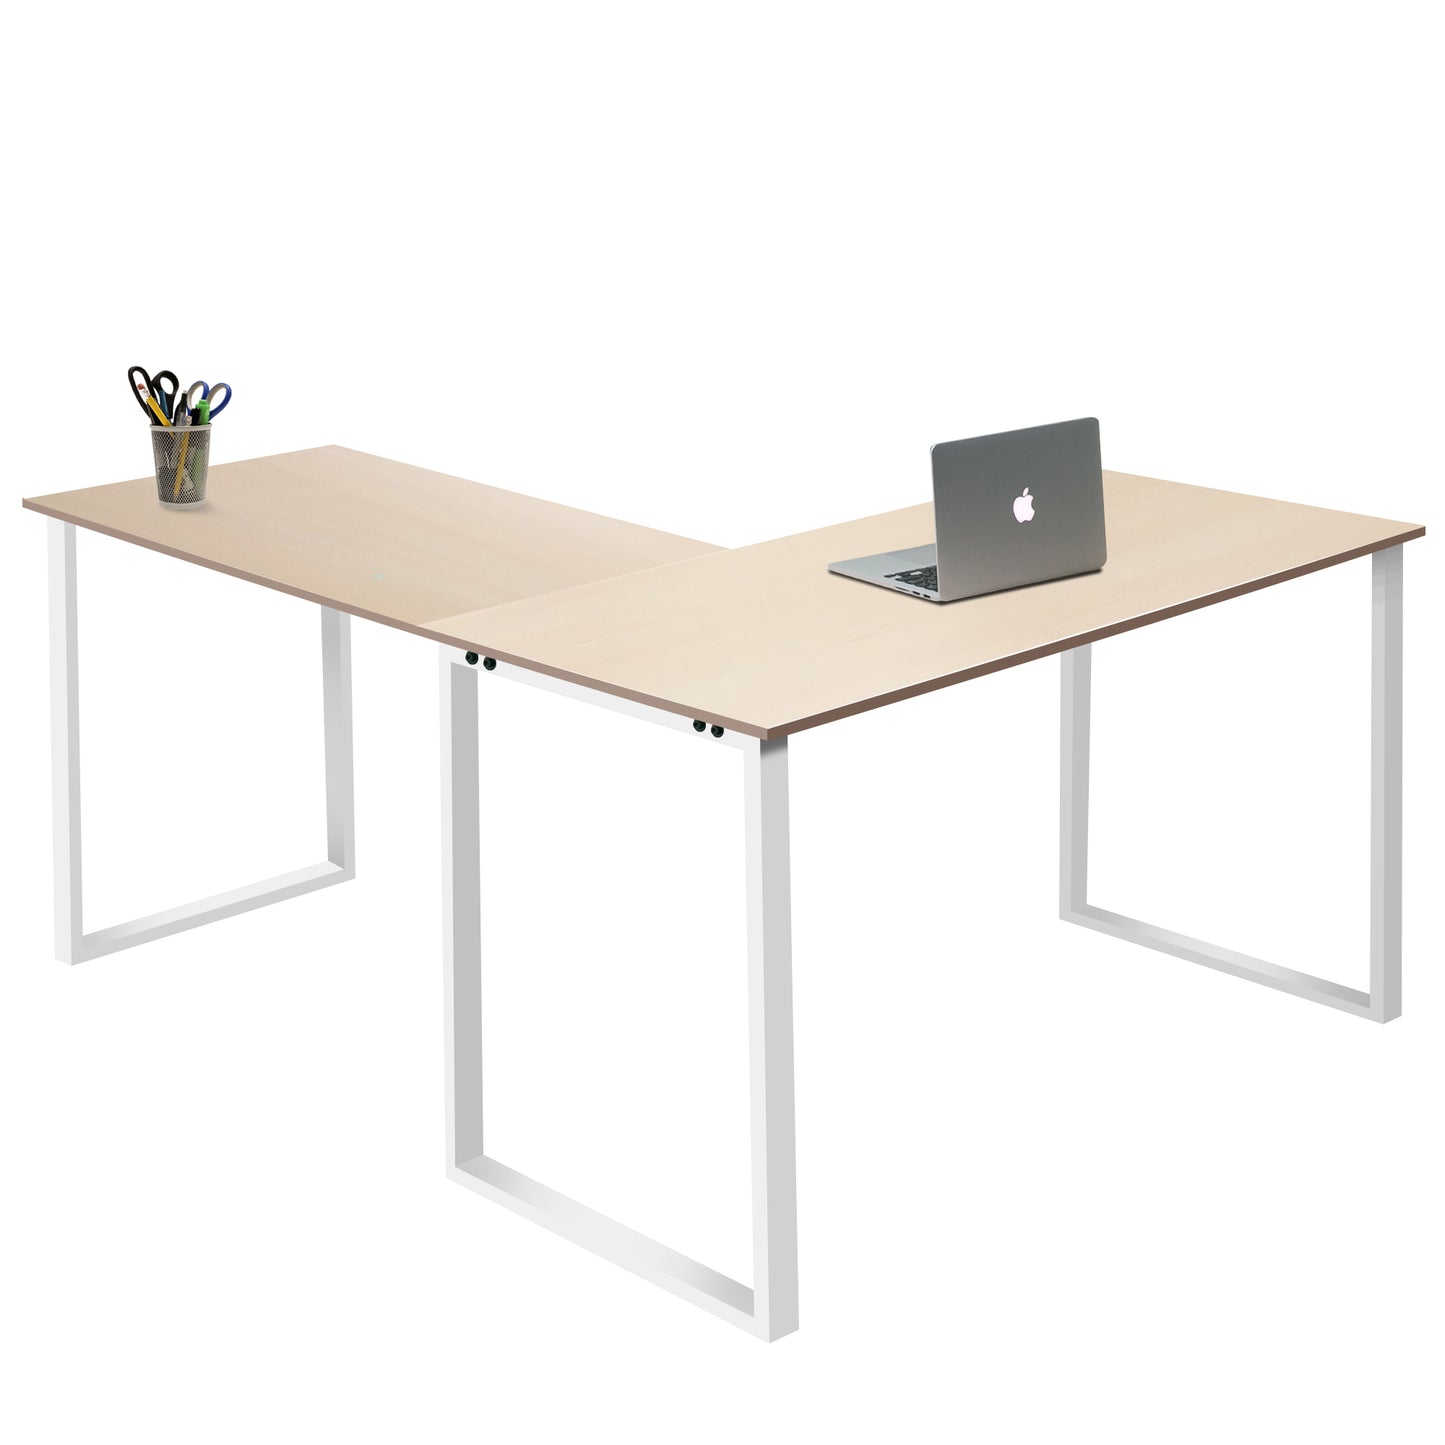 L-Shaped Computer Desk, Industrial Office Corner Desk, 58’’ Writing Study Table, Wood Tabletop Home Gaming Desk with Metal Frame, Large 2 Person Table for Home Office Workstation